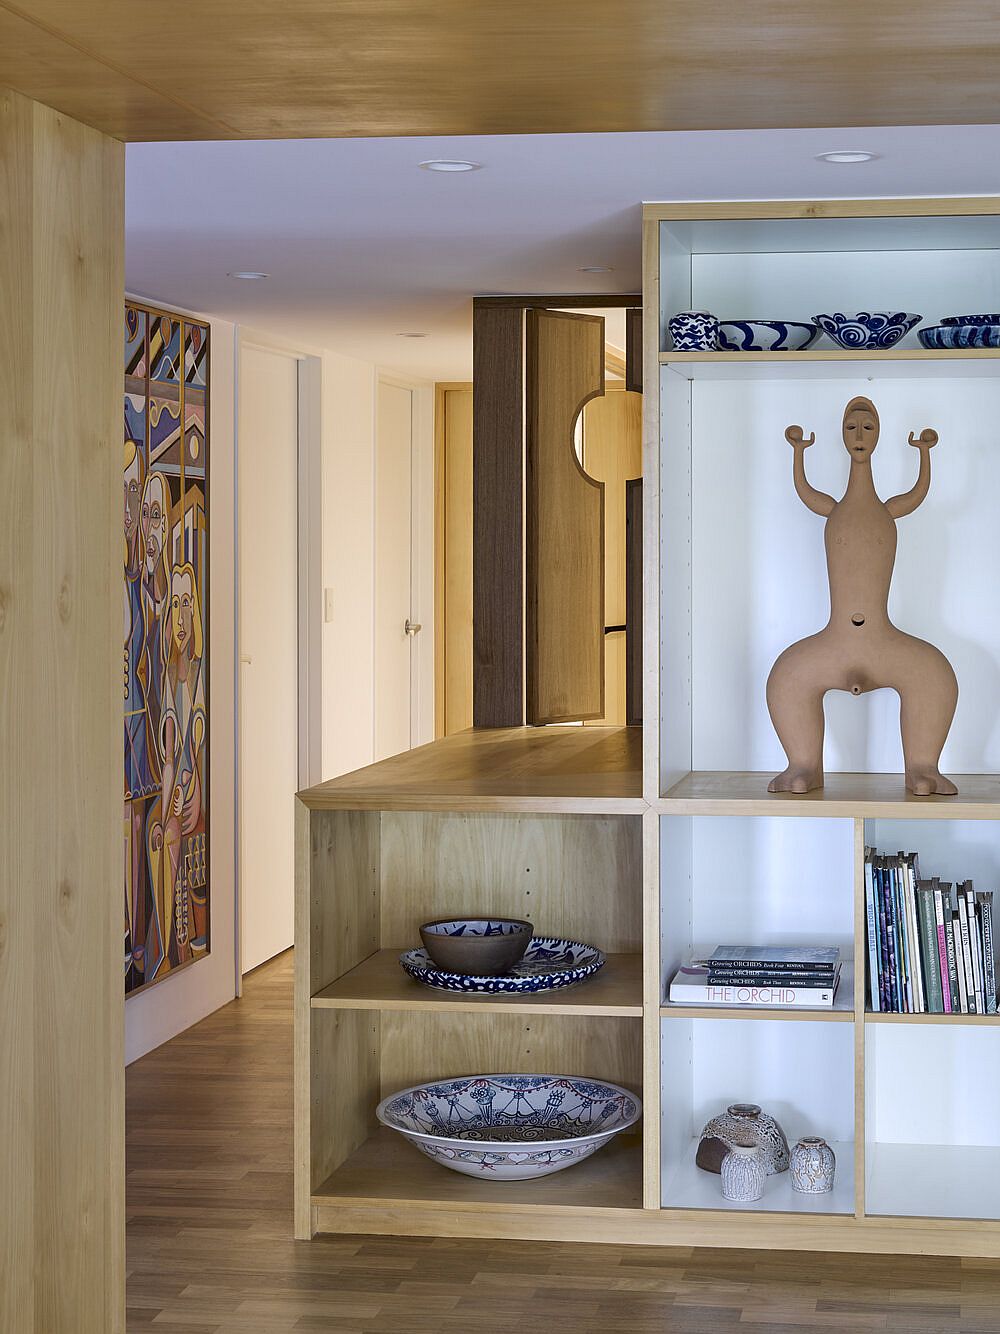 Custom wooden shelf inside the apartment brings additional storage space to the living area